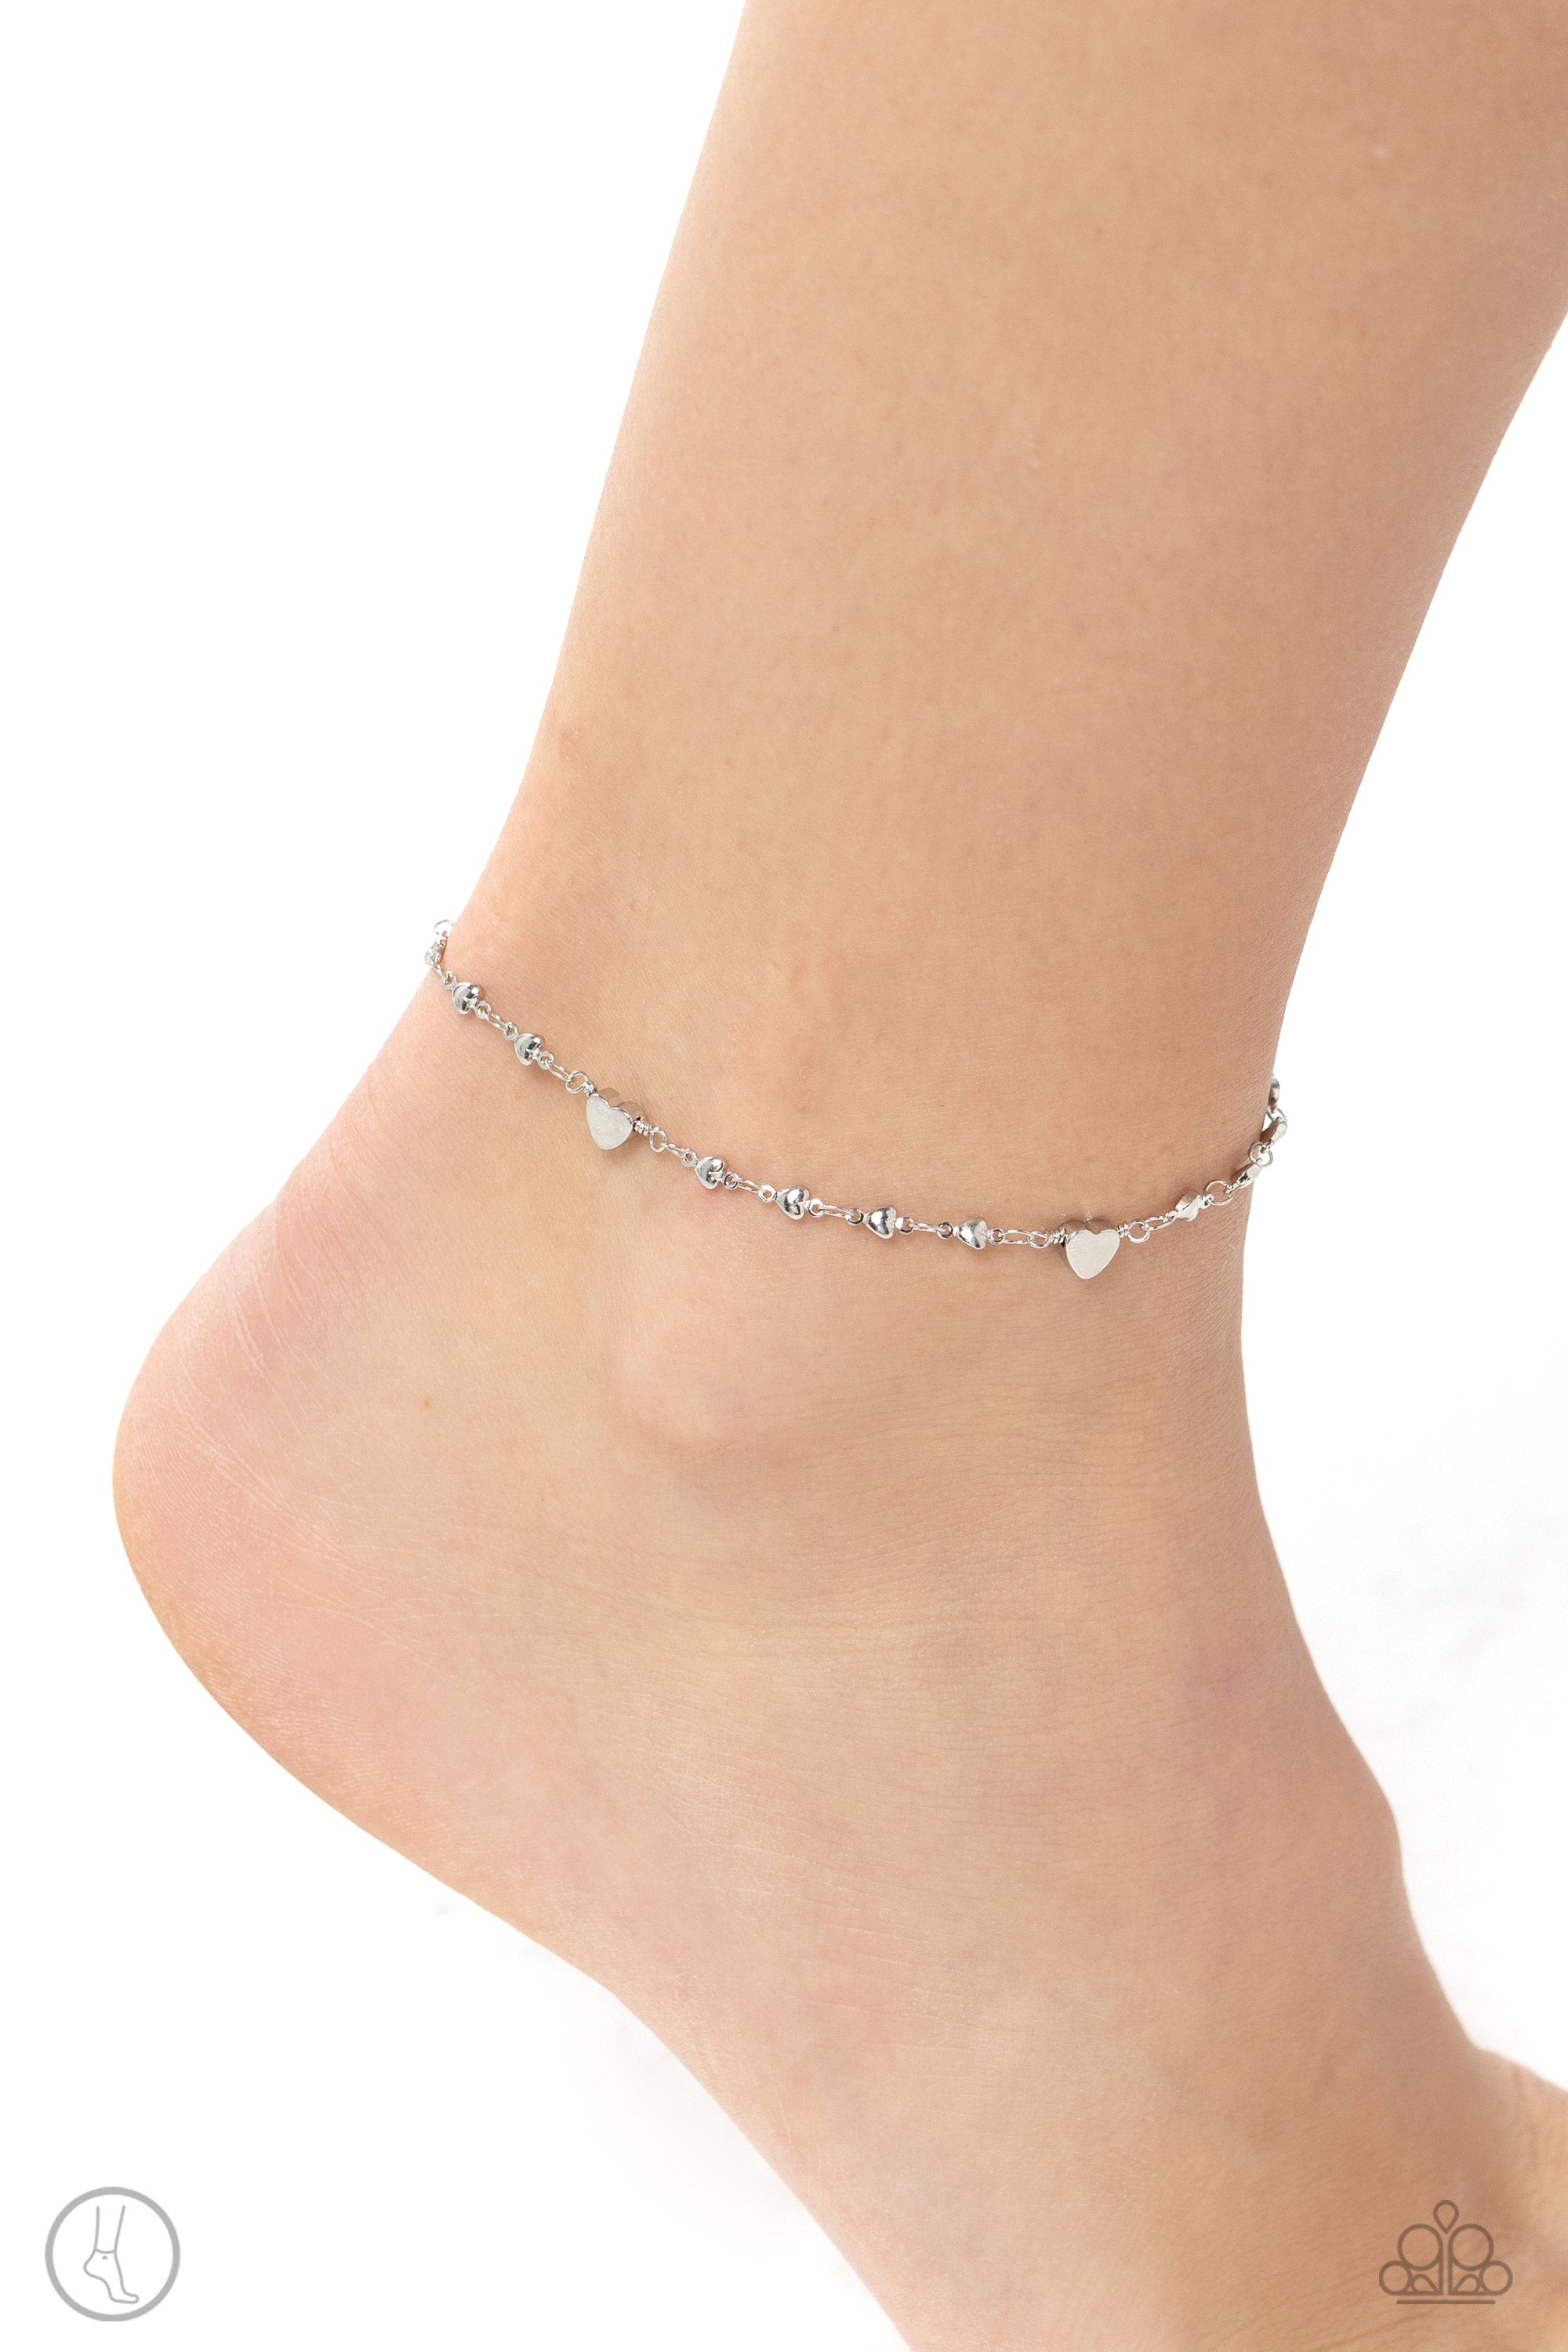 Highlighting My Heart Silver Anklet - Paparazzi Accessories- lightbox - CarasShop.com - $5 Jewelry by Cara Jewels